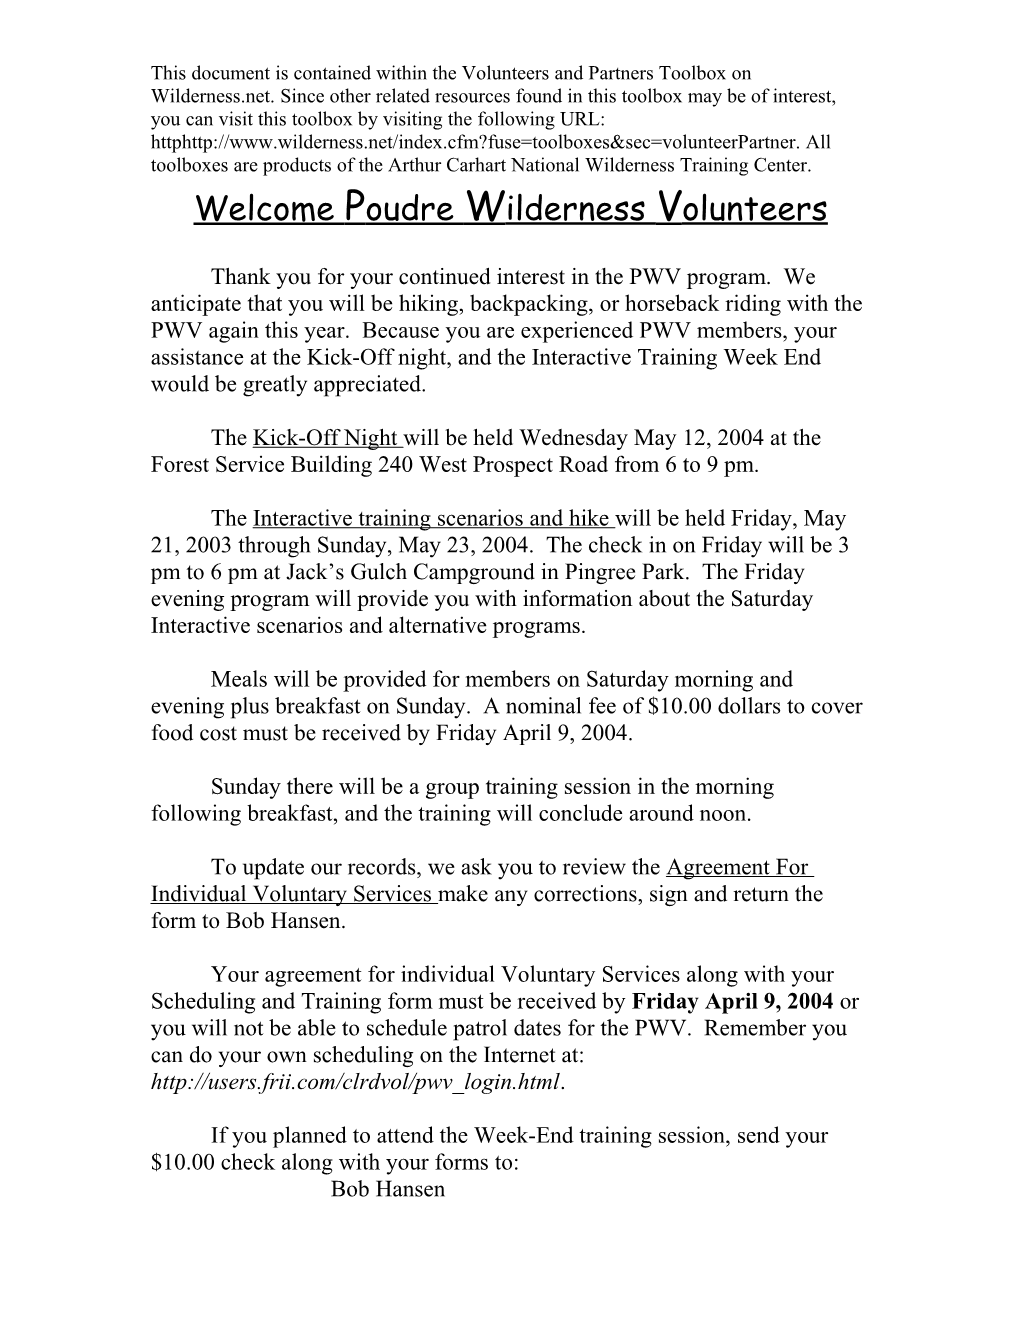 Welcome Poudre Wilderness Volunteers